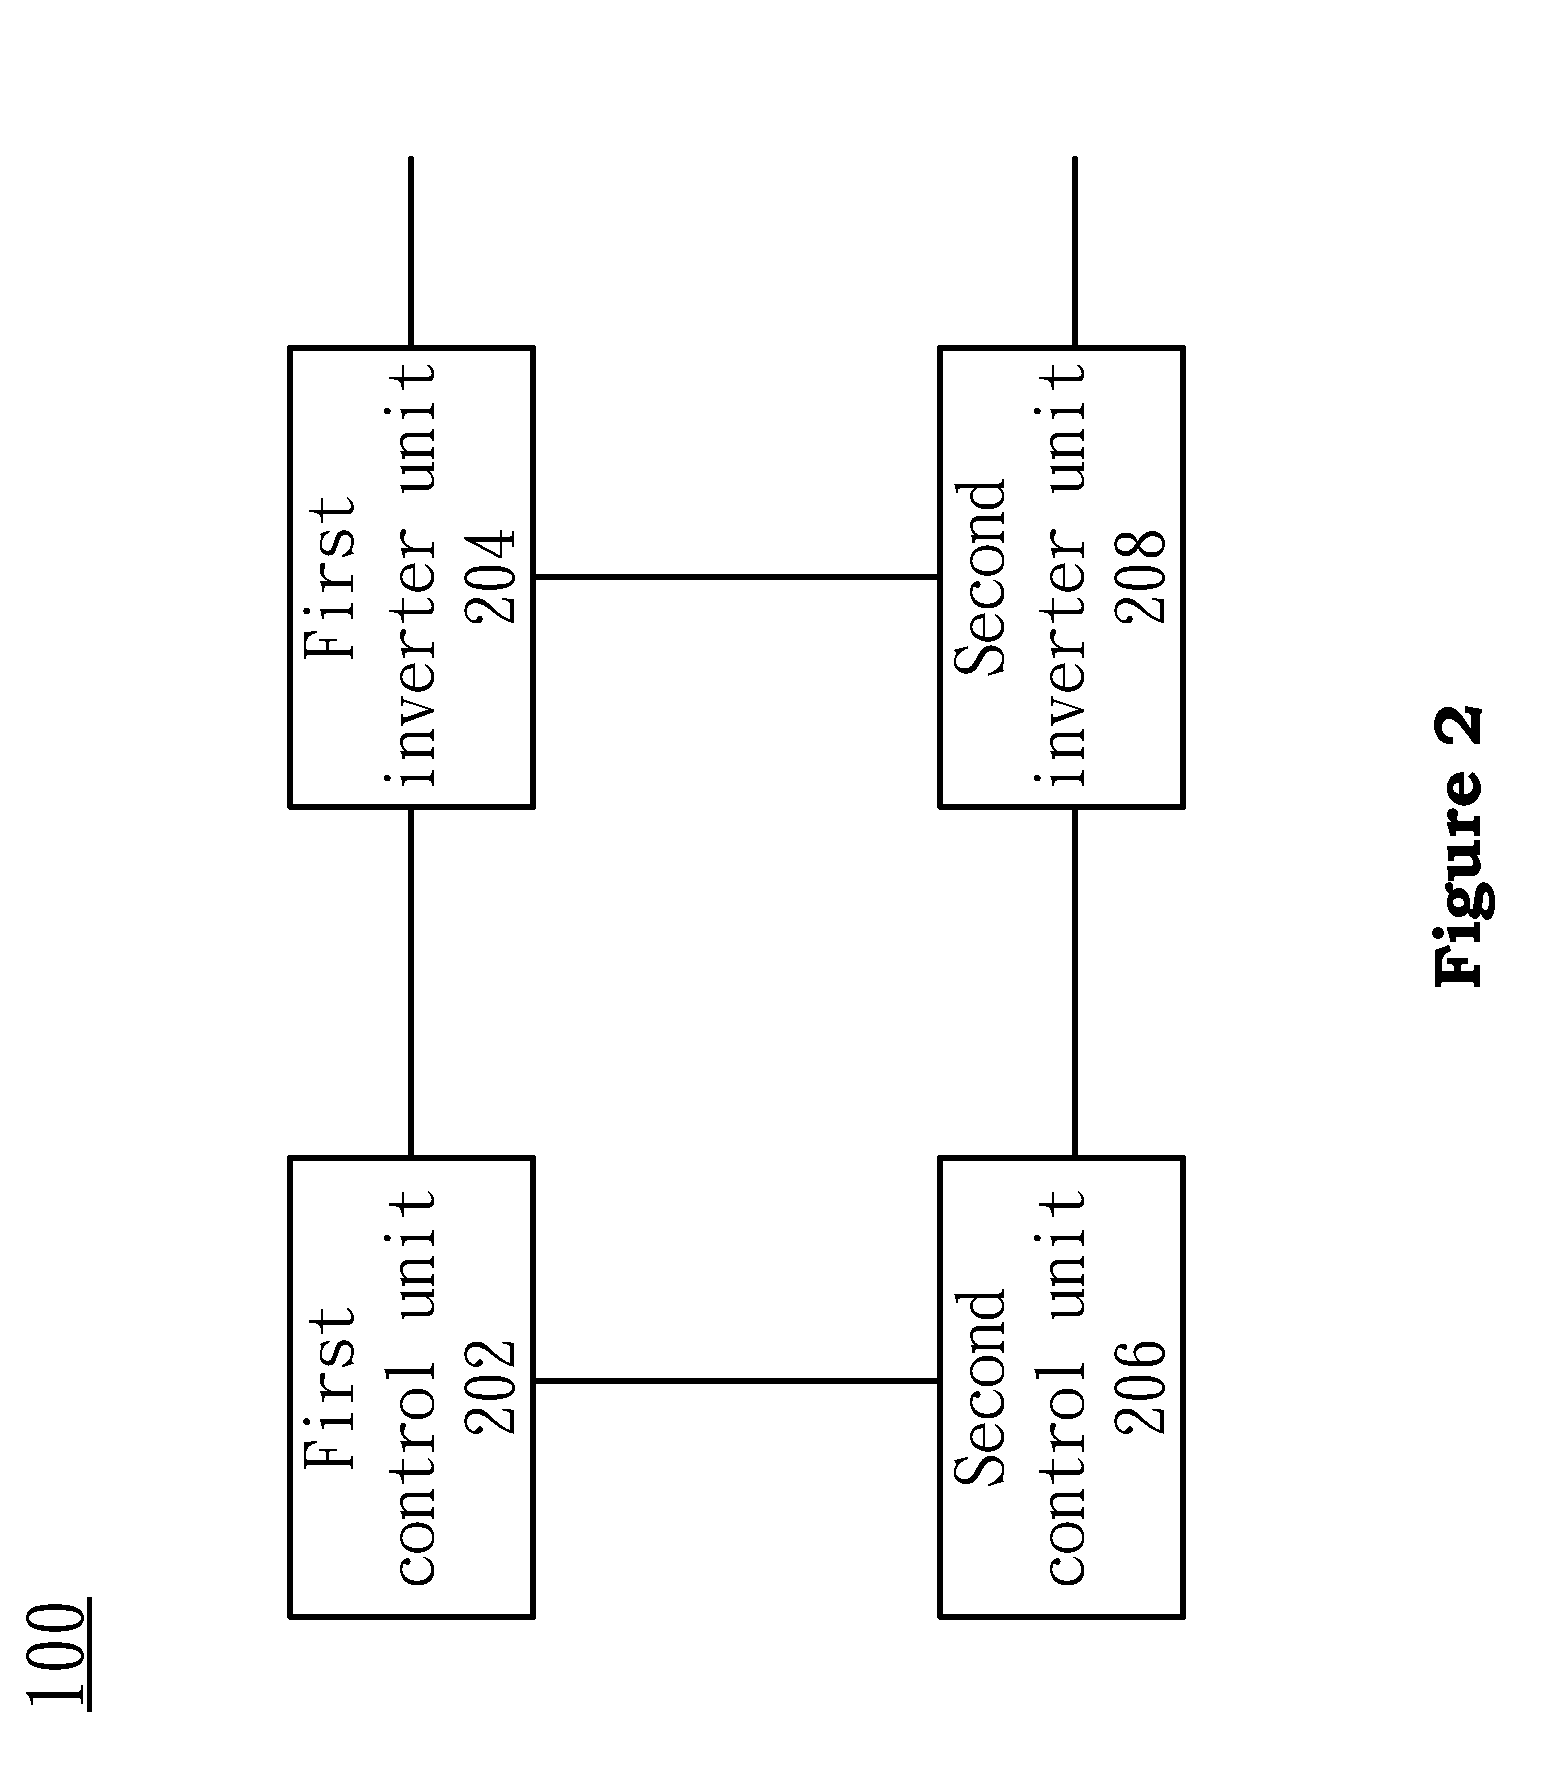 Oscillator based on a 6T SRAM for measuring the Bias Temperature Instability